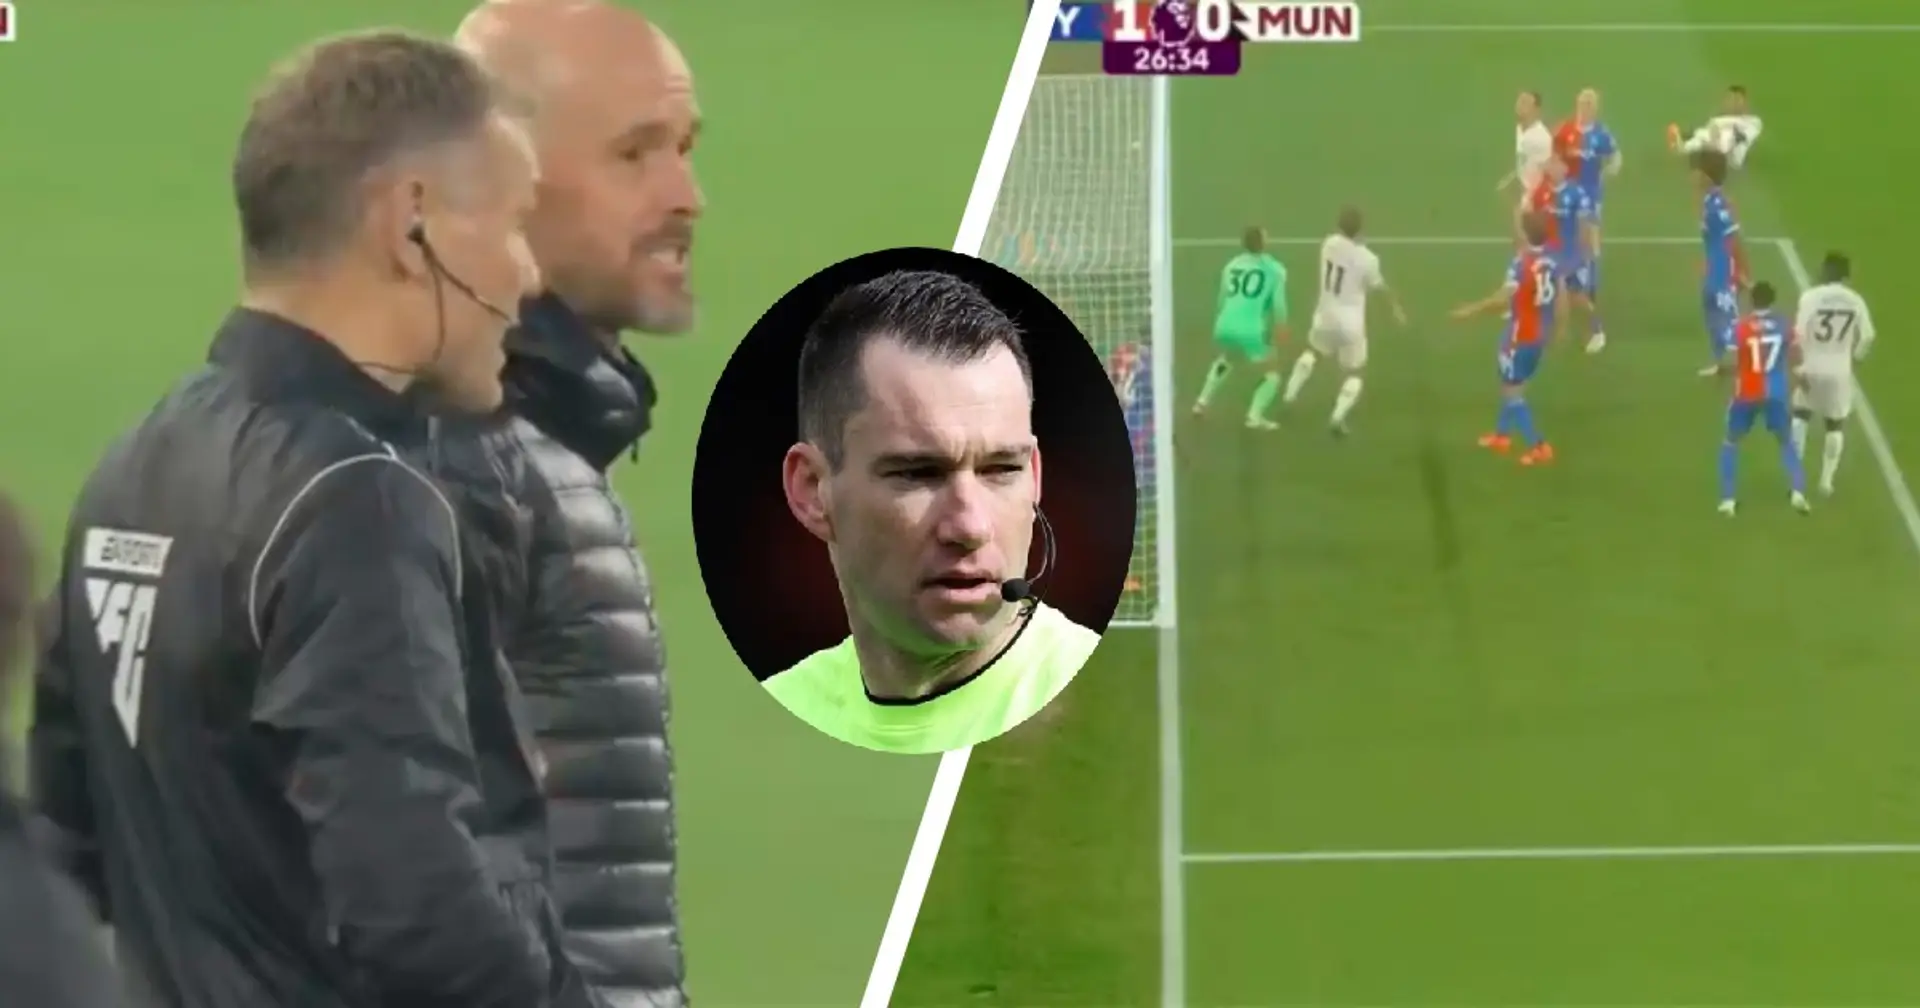 Does Man United's disallowed goal have anything to do with new RefCam? 